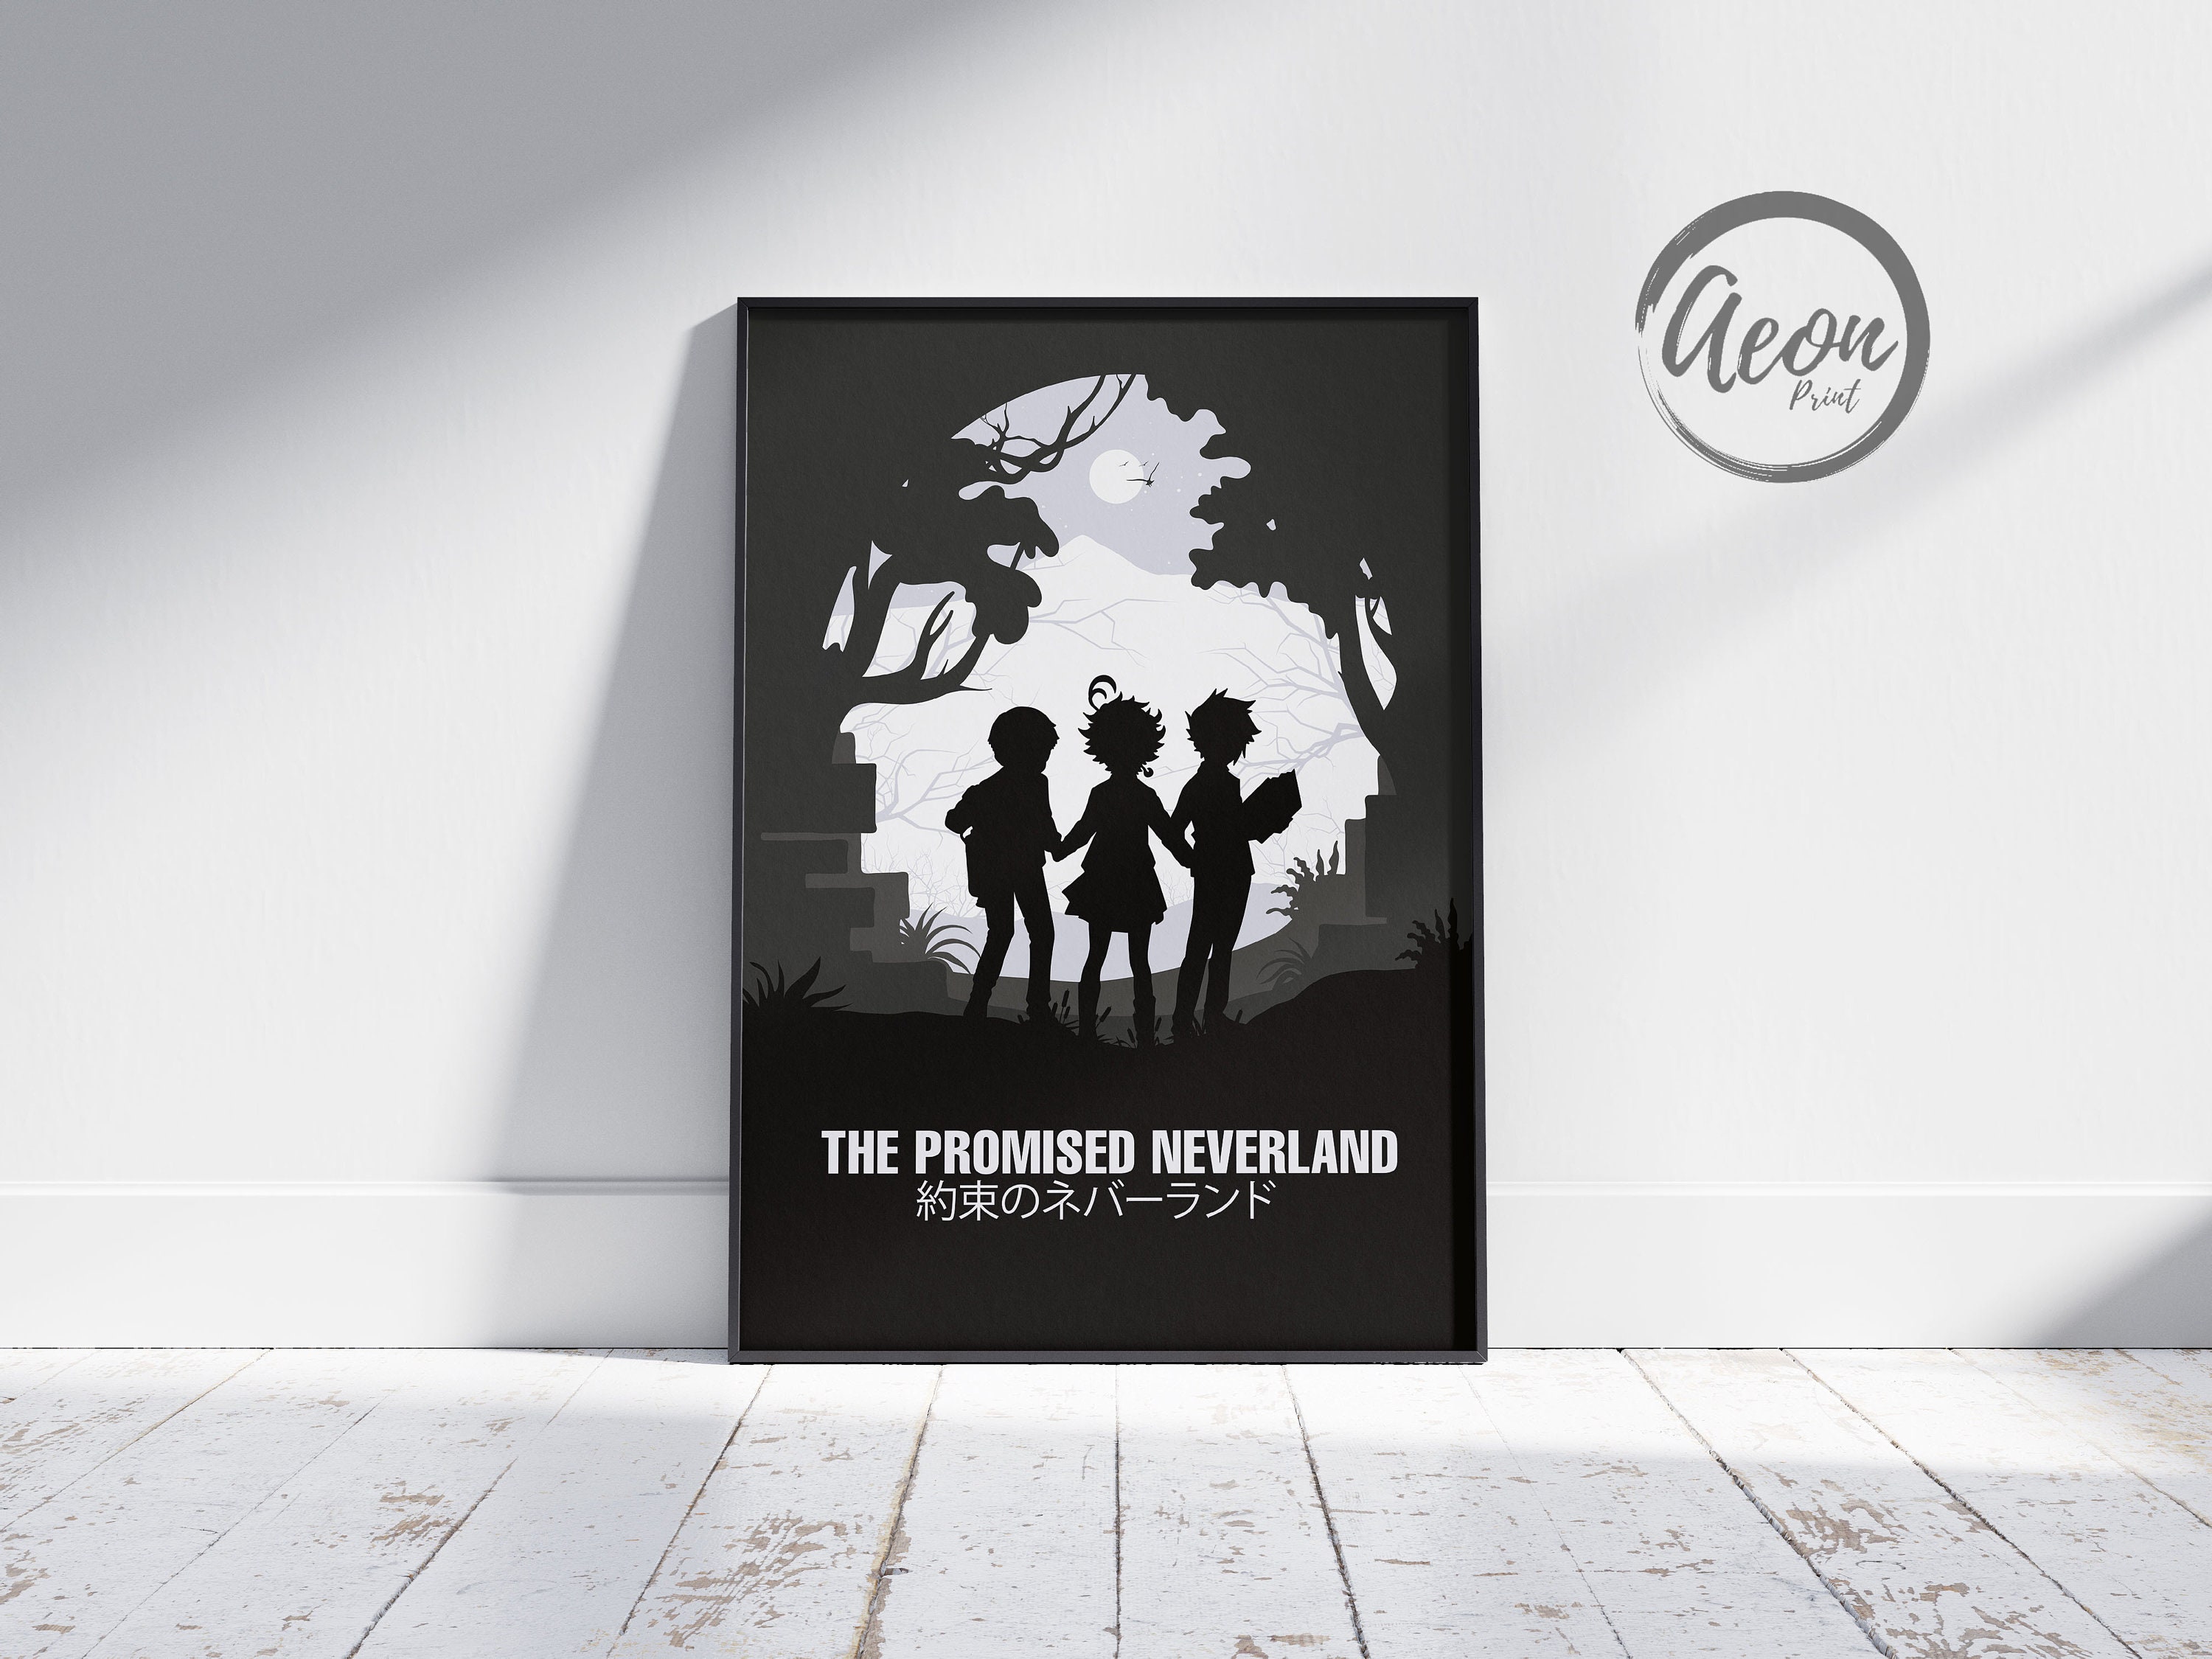 ZXCVM The Promised Neverland 14 Manga/Anime TV Show Poster/Print Poster  Frame Artist Home Decor Artwork for Living Room Wall Decoration  16x24inch(40x60cm) : : Home